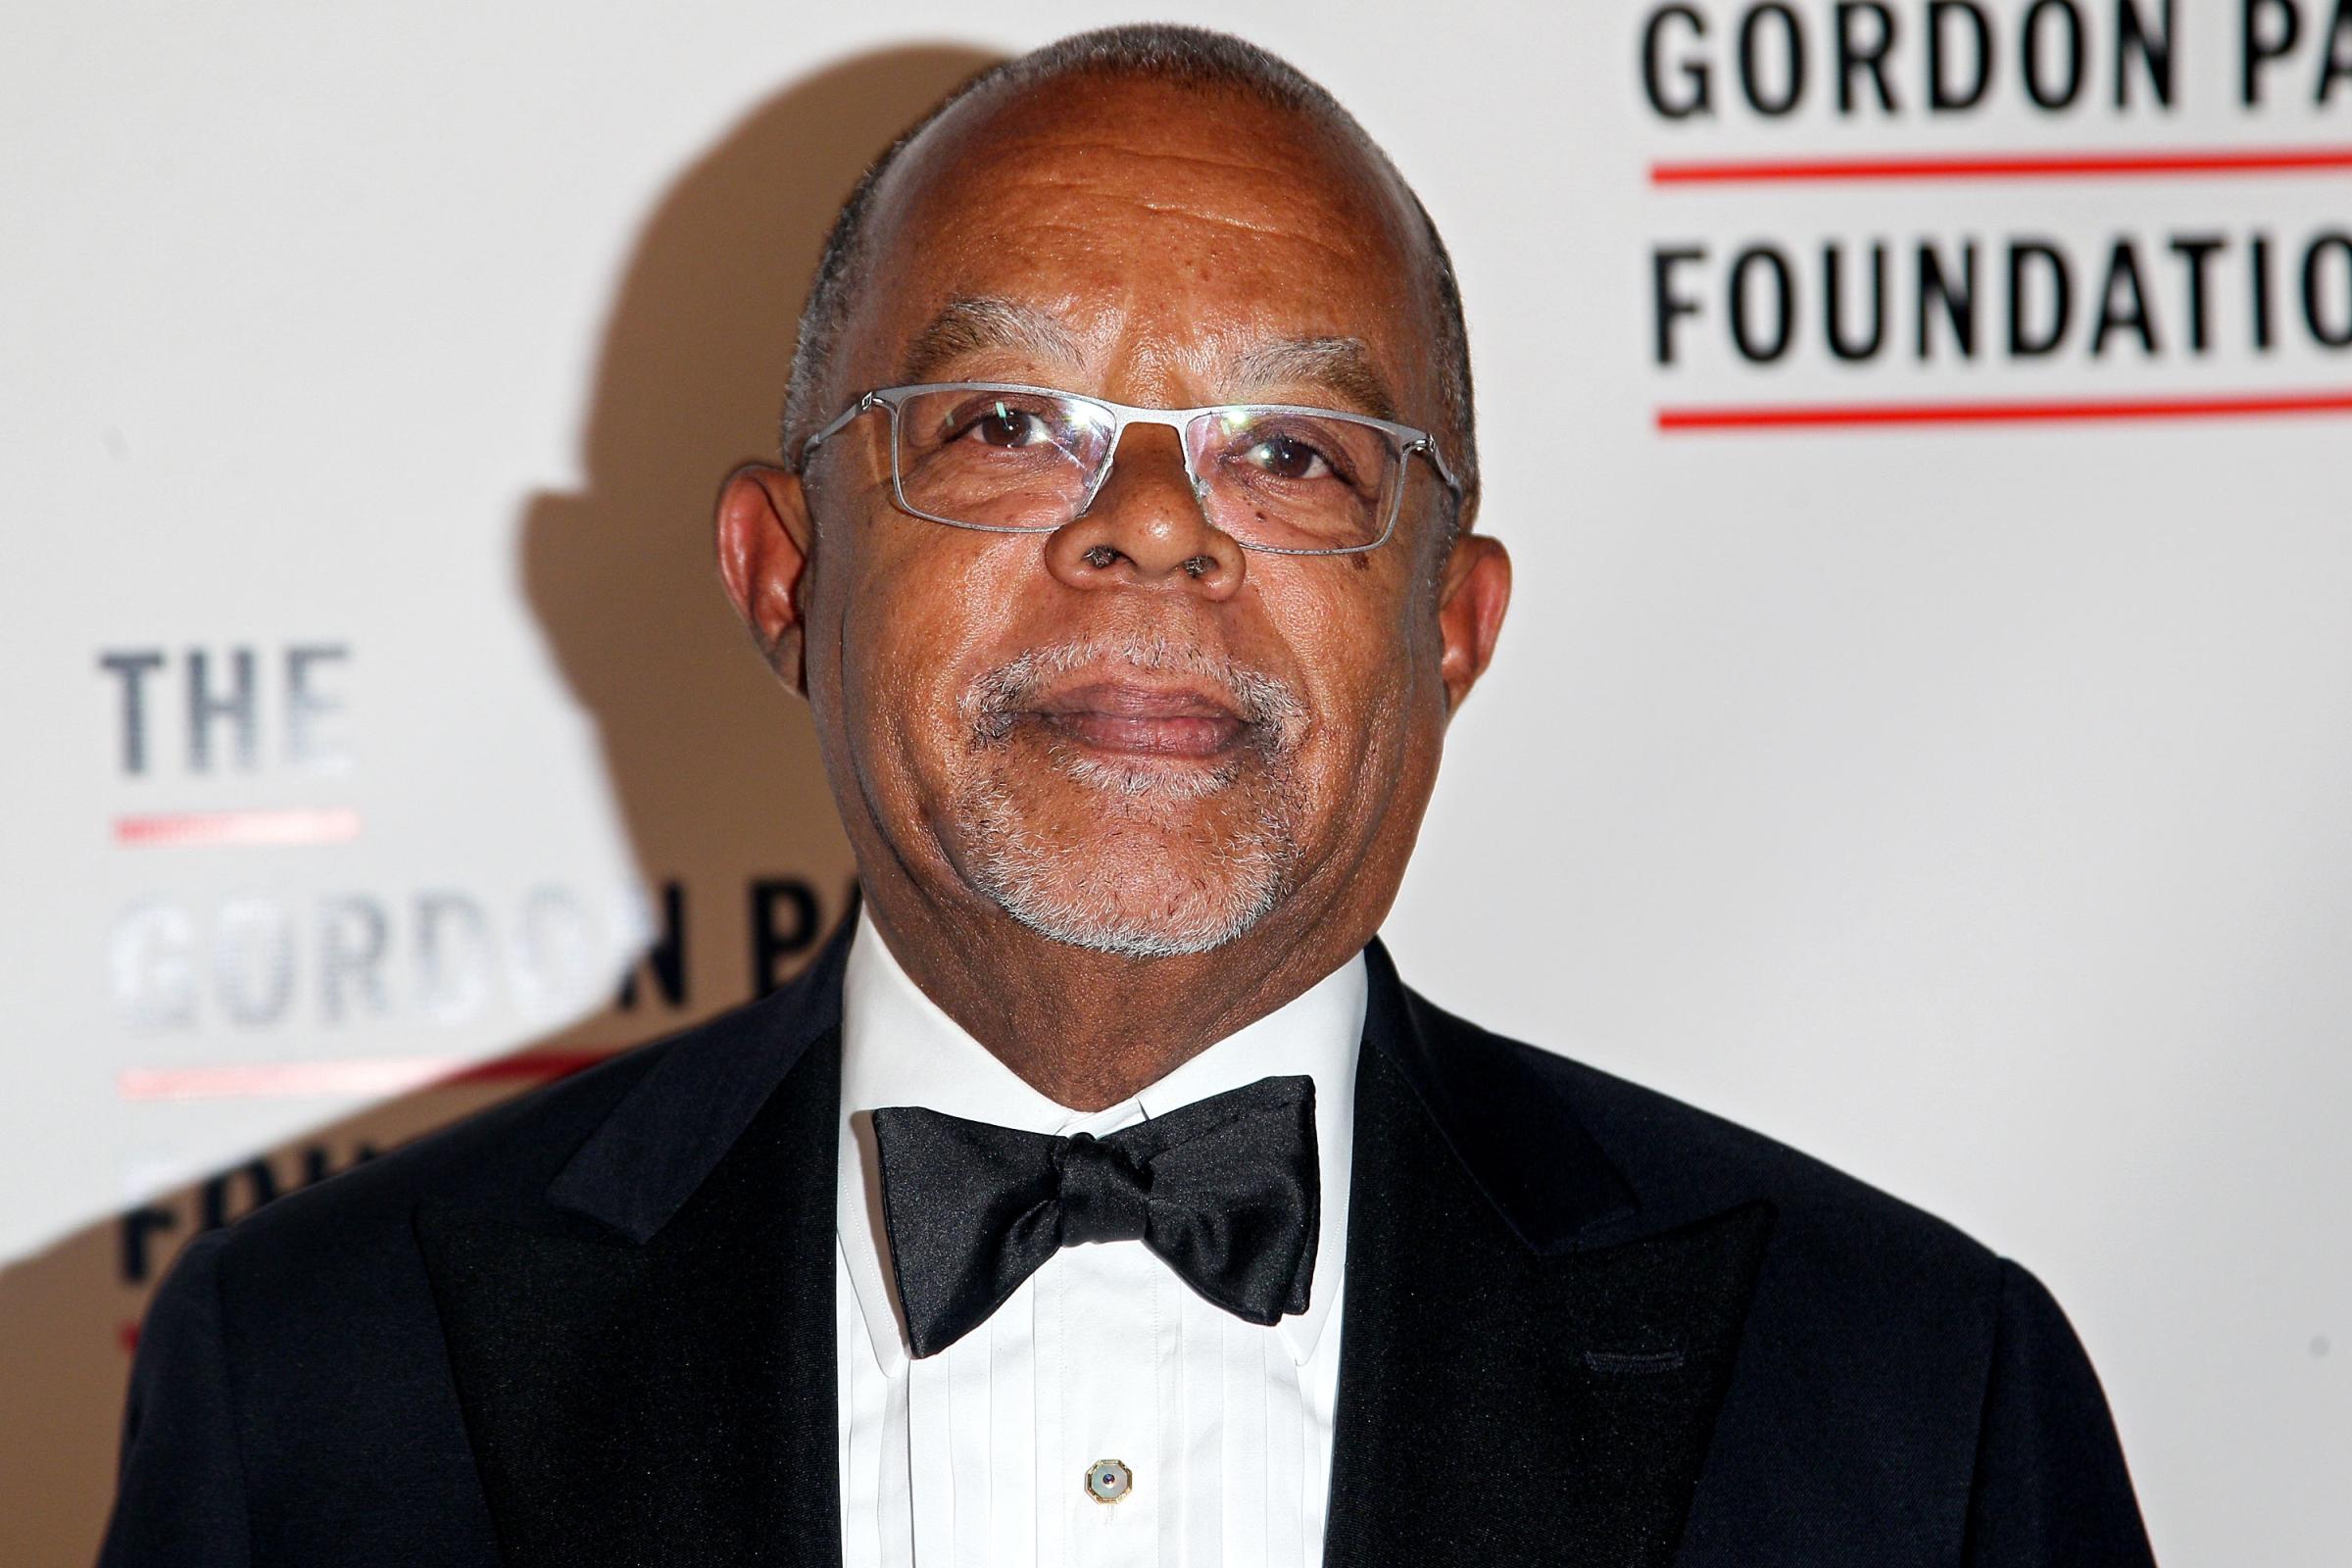 Henry Louis Gates Jr. attends the 2016 Gordon Parks Foundation Awards Dinner at Cipriani 42nd Street on May 24, 2016 in New York City.